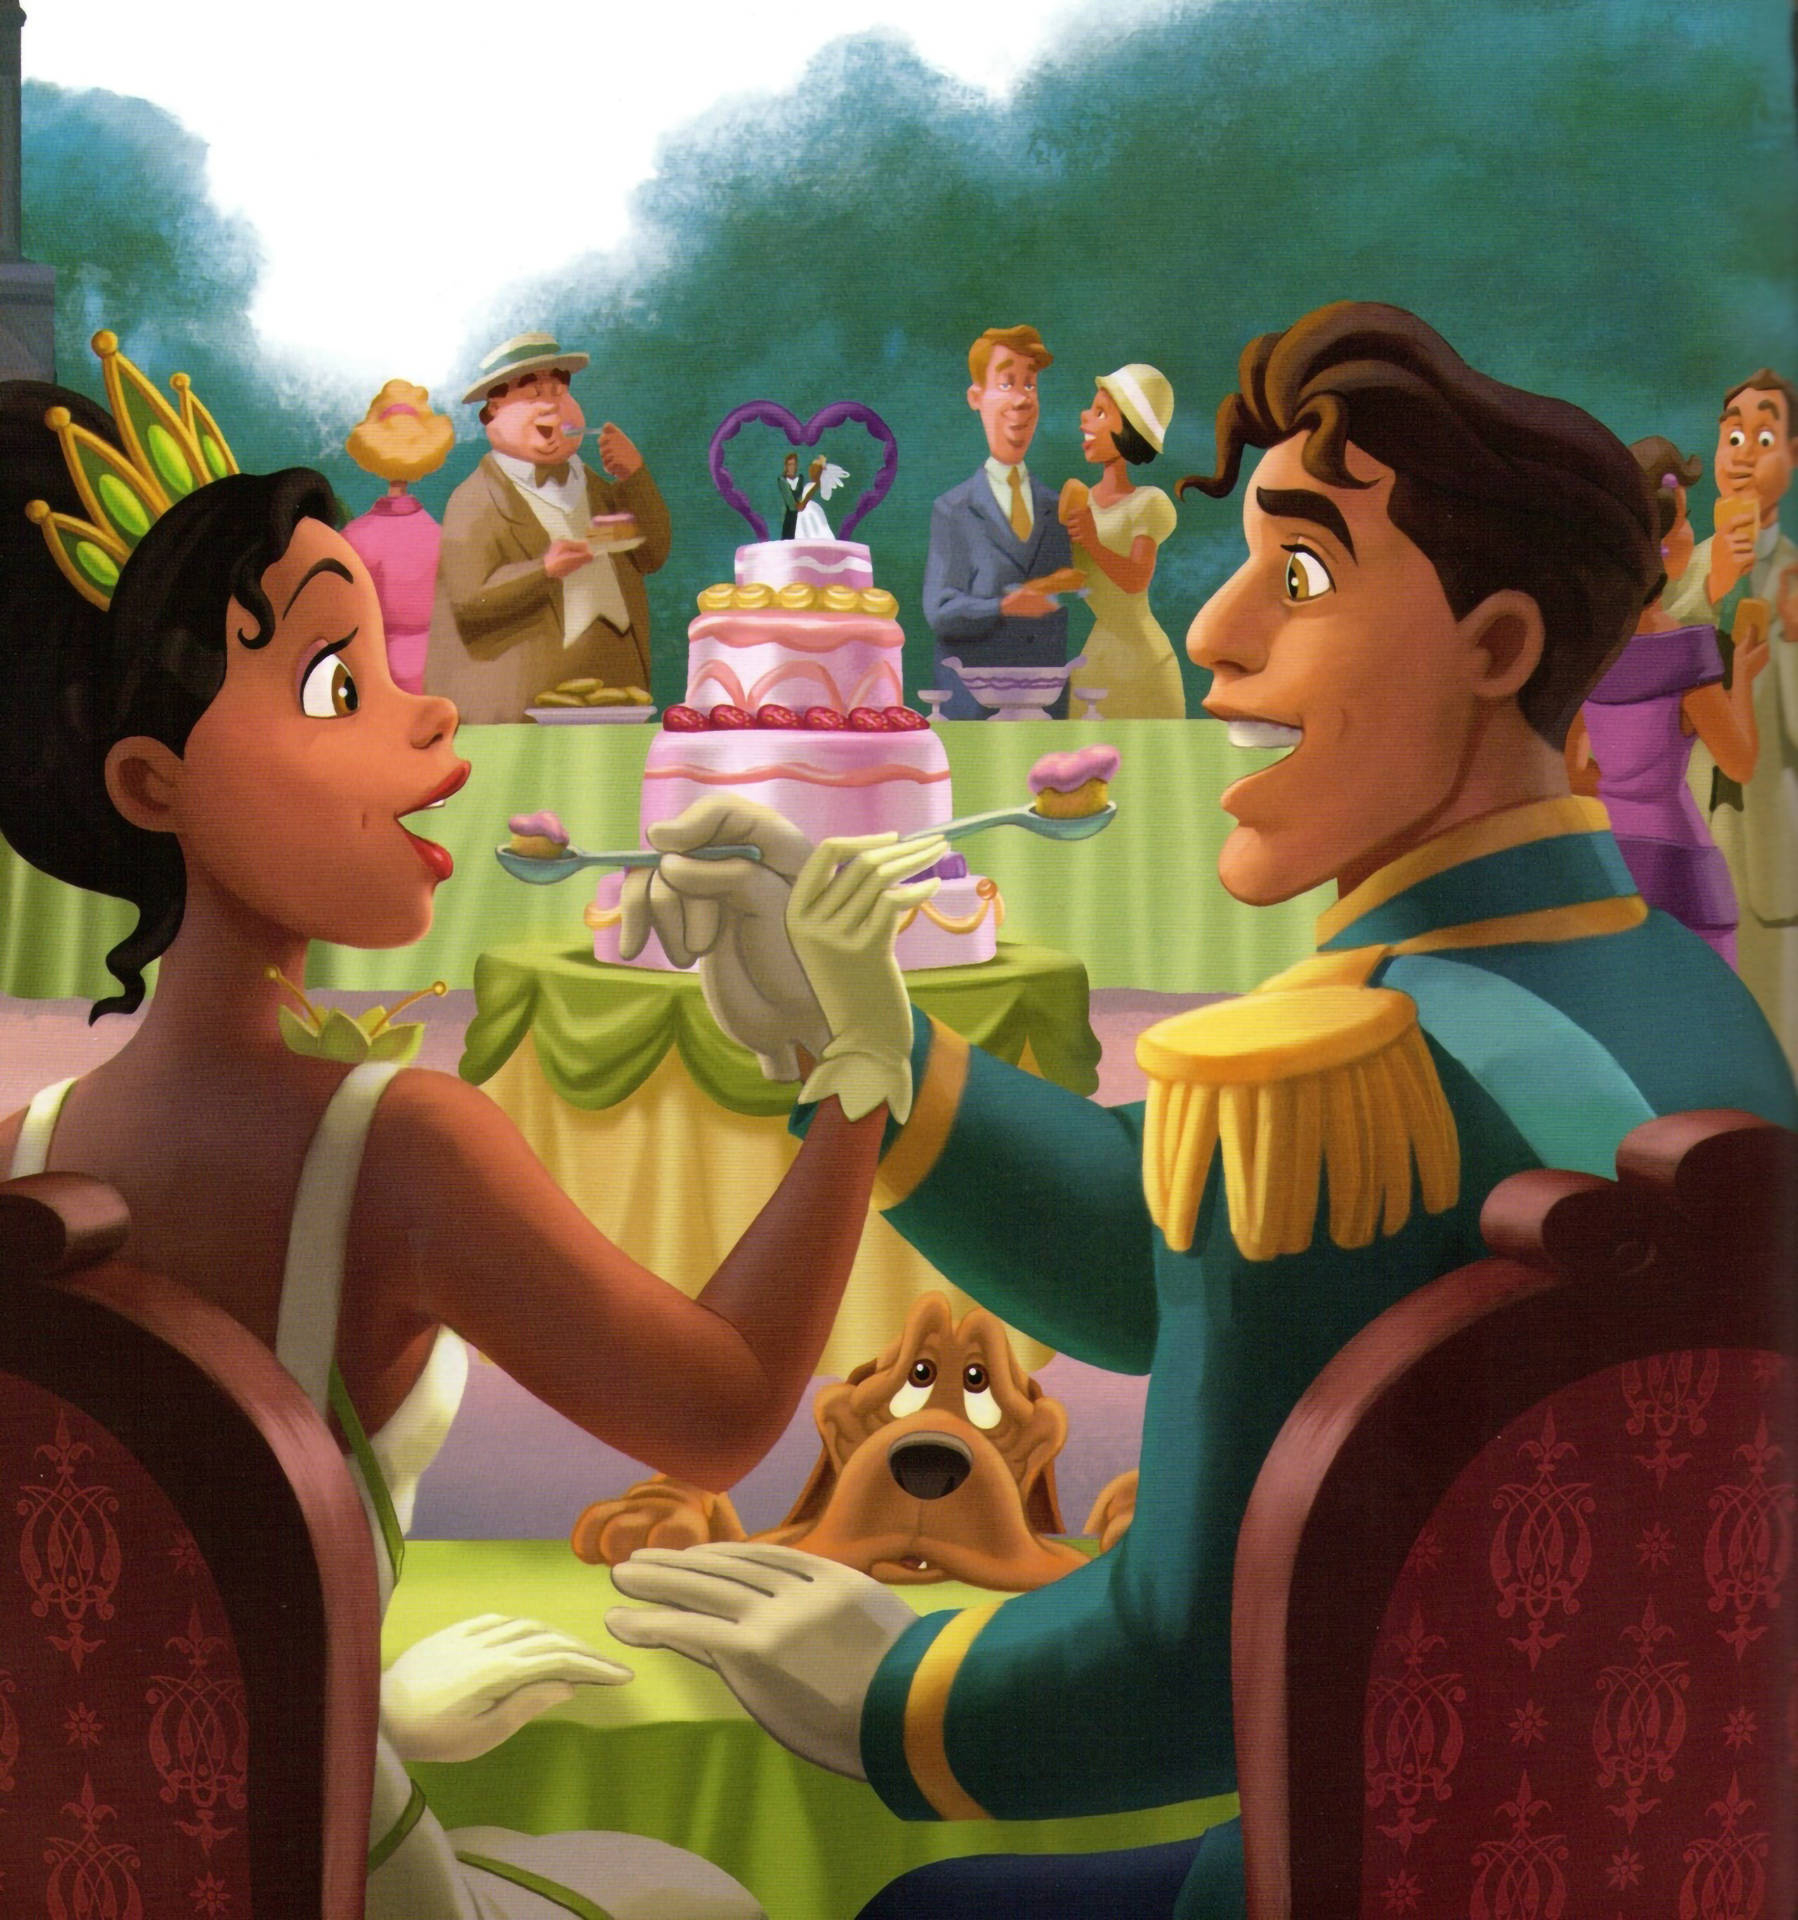 1798x1920 Download The Princess And The Frog Wedding Reception Wallpaper | Wallpapers .com